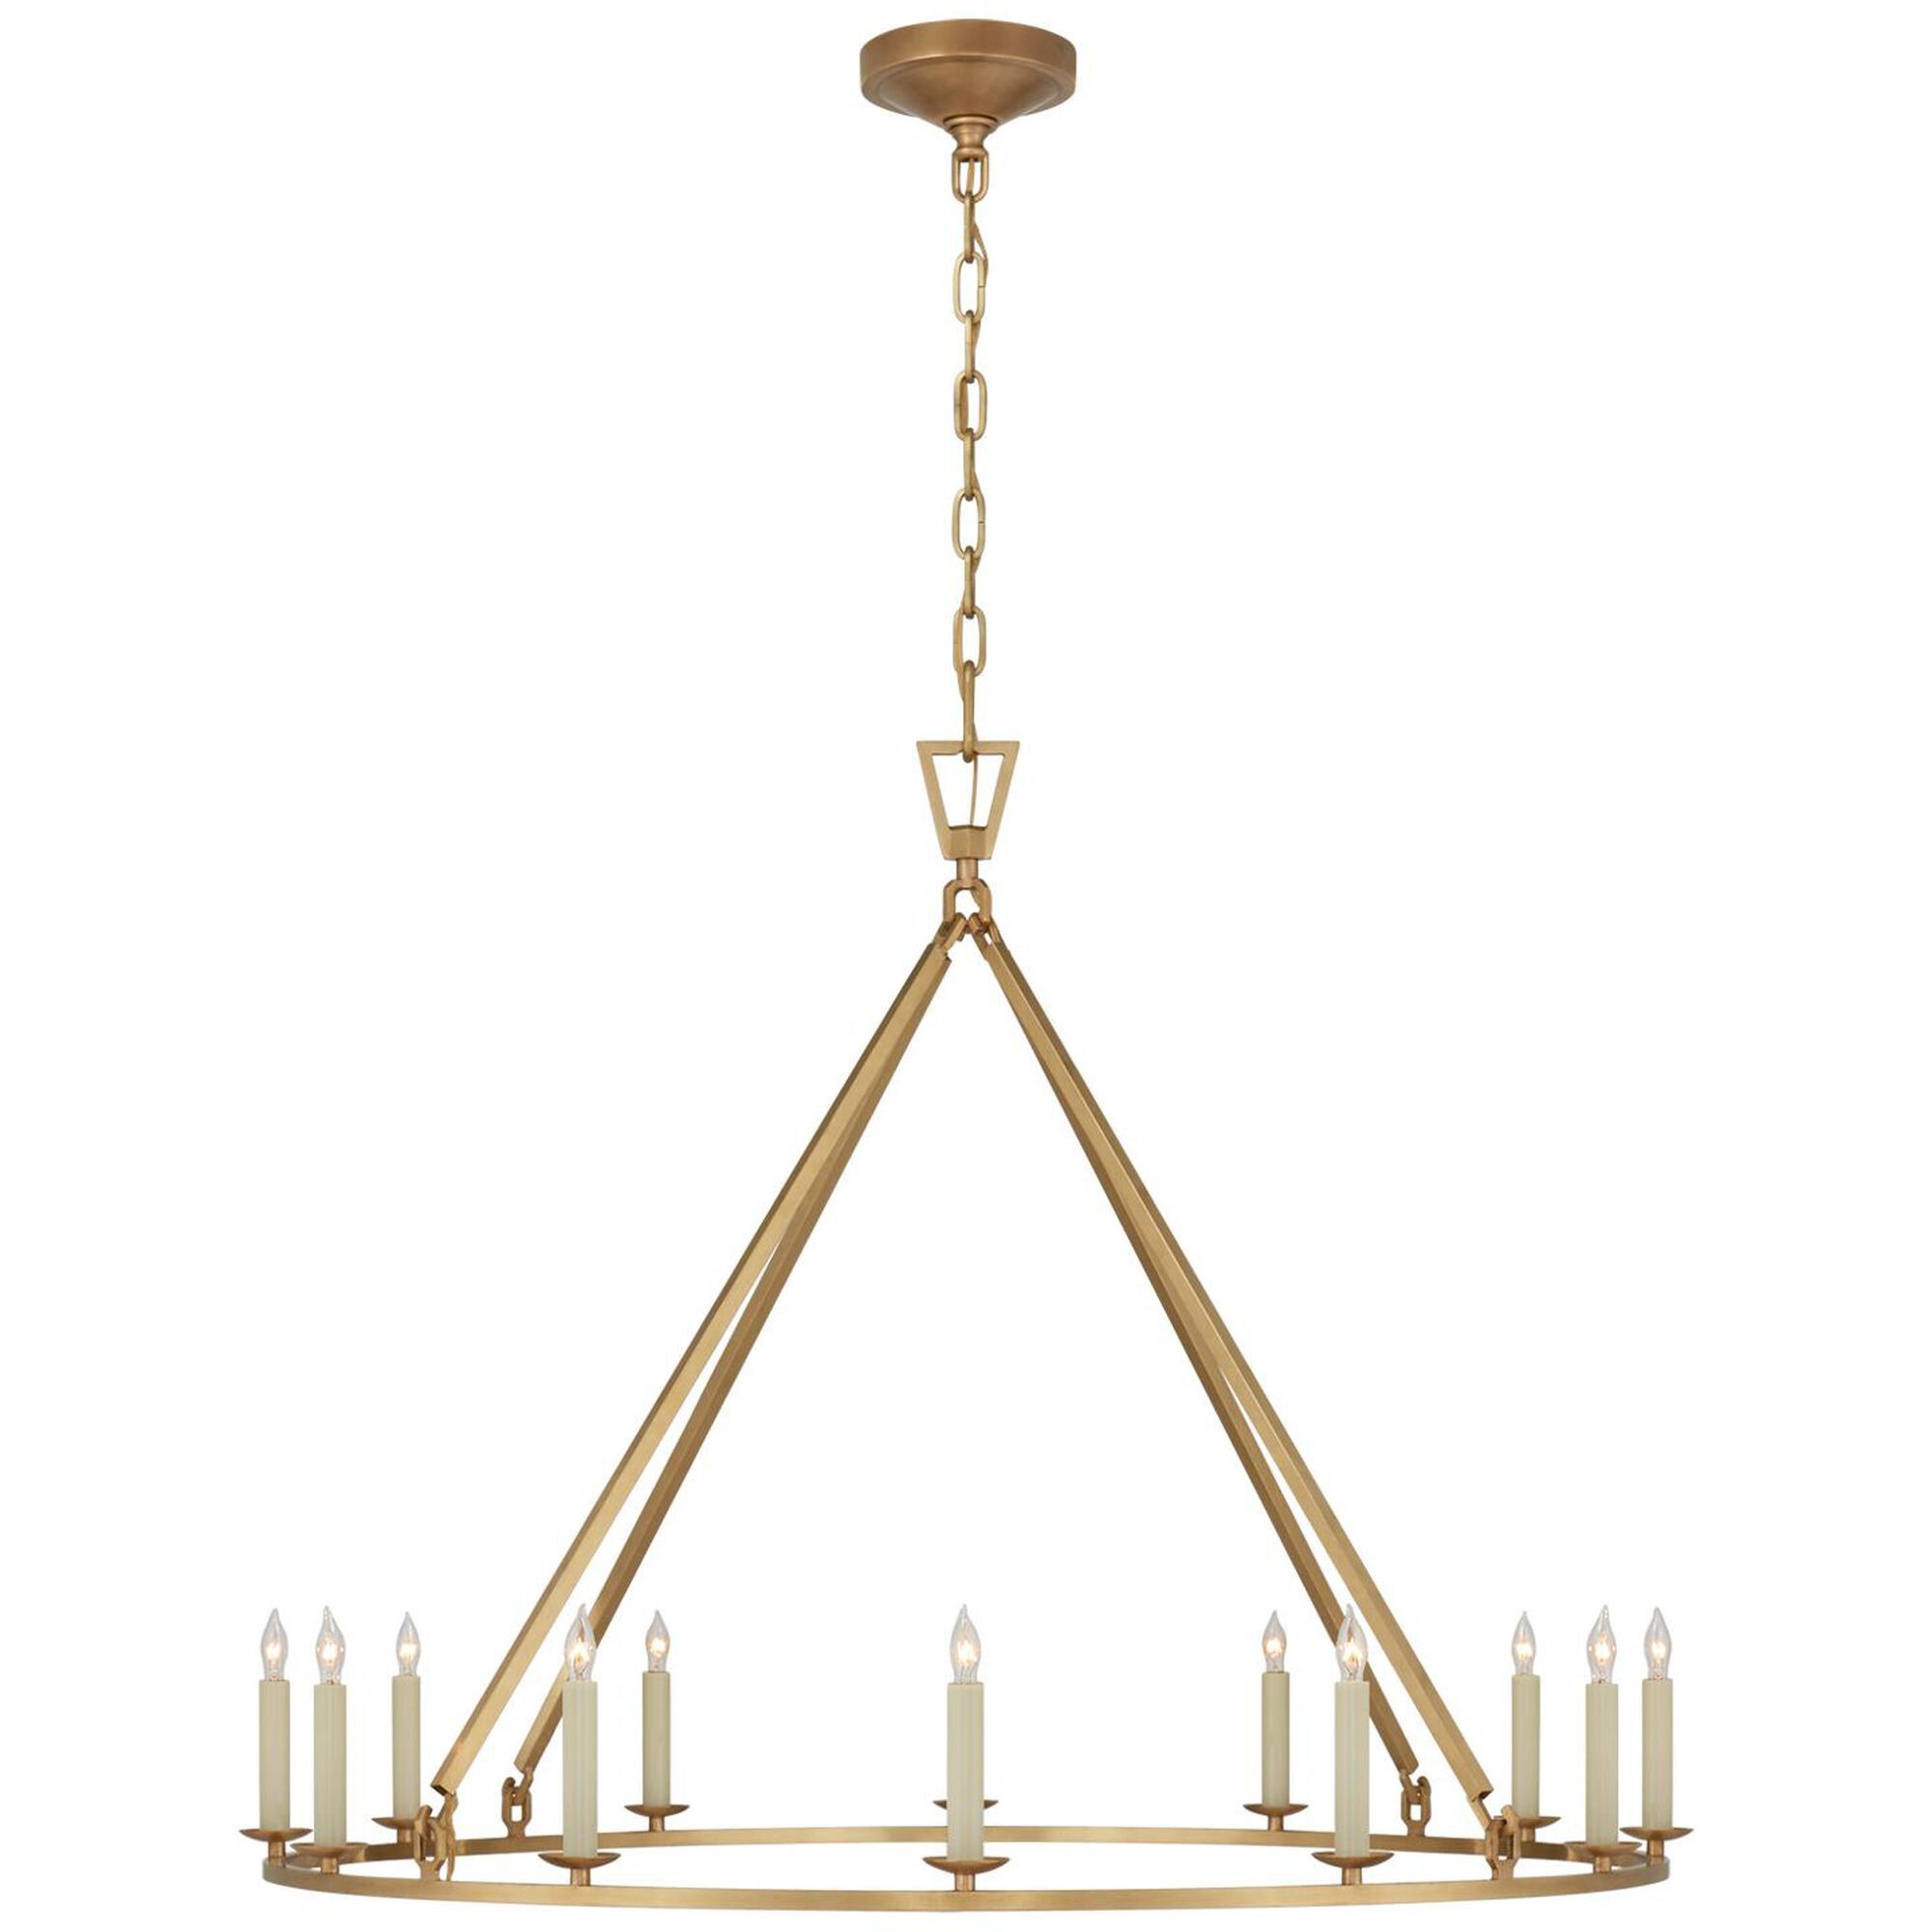 Chapman & Myers Darlana 40 Inch 12 Light Chandelier by Visual Comfort and Co. | Capitol Lighting 1800lighting.com